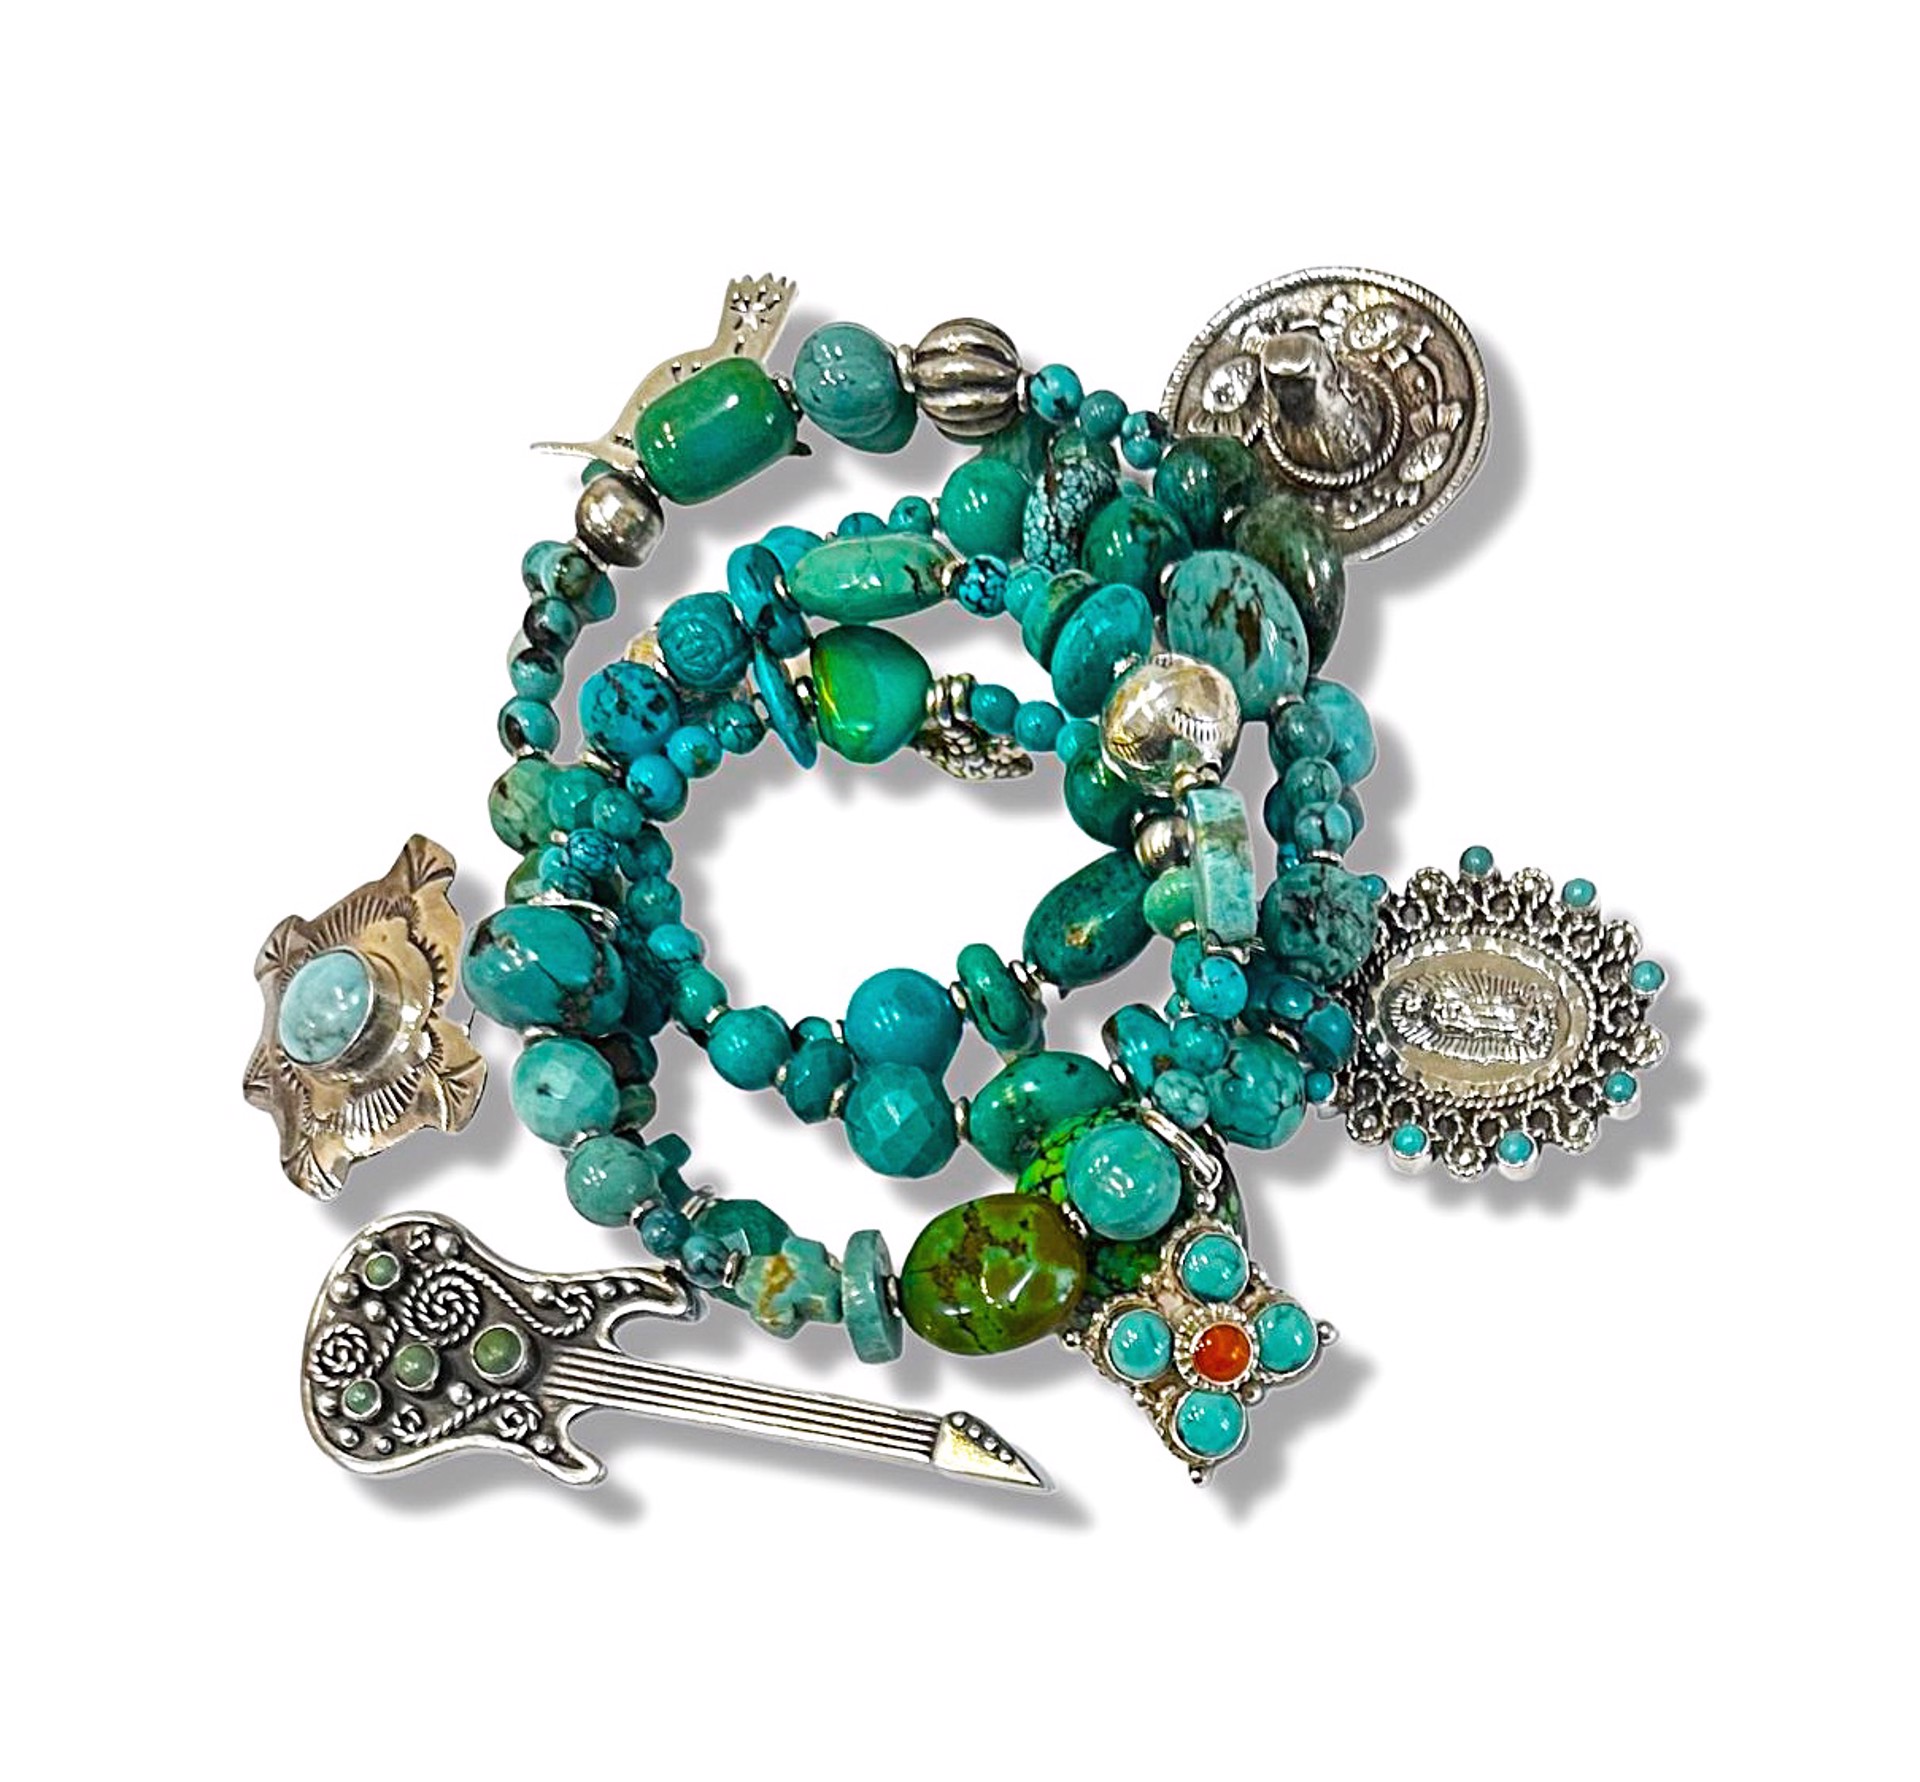 KY 1473 Five Strand Turquoise and Sterling Silver Charms Coil Bracelet by Kim Yubeta